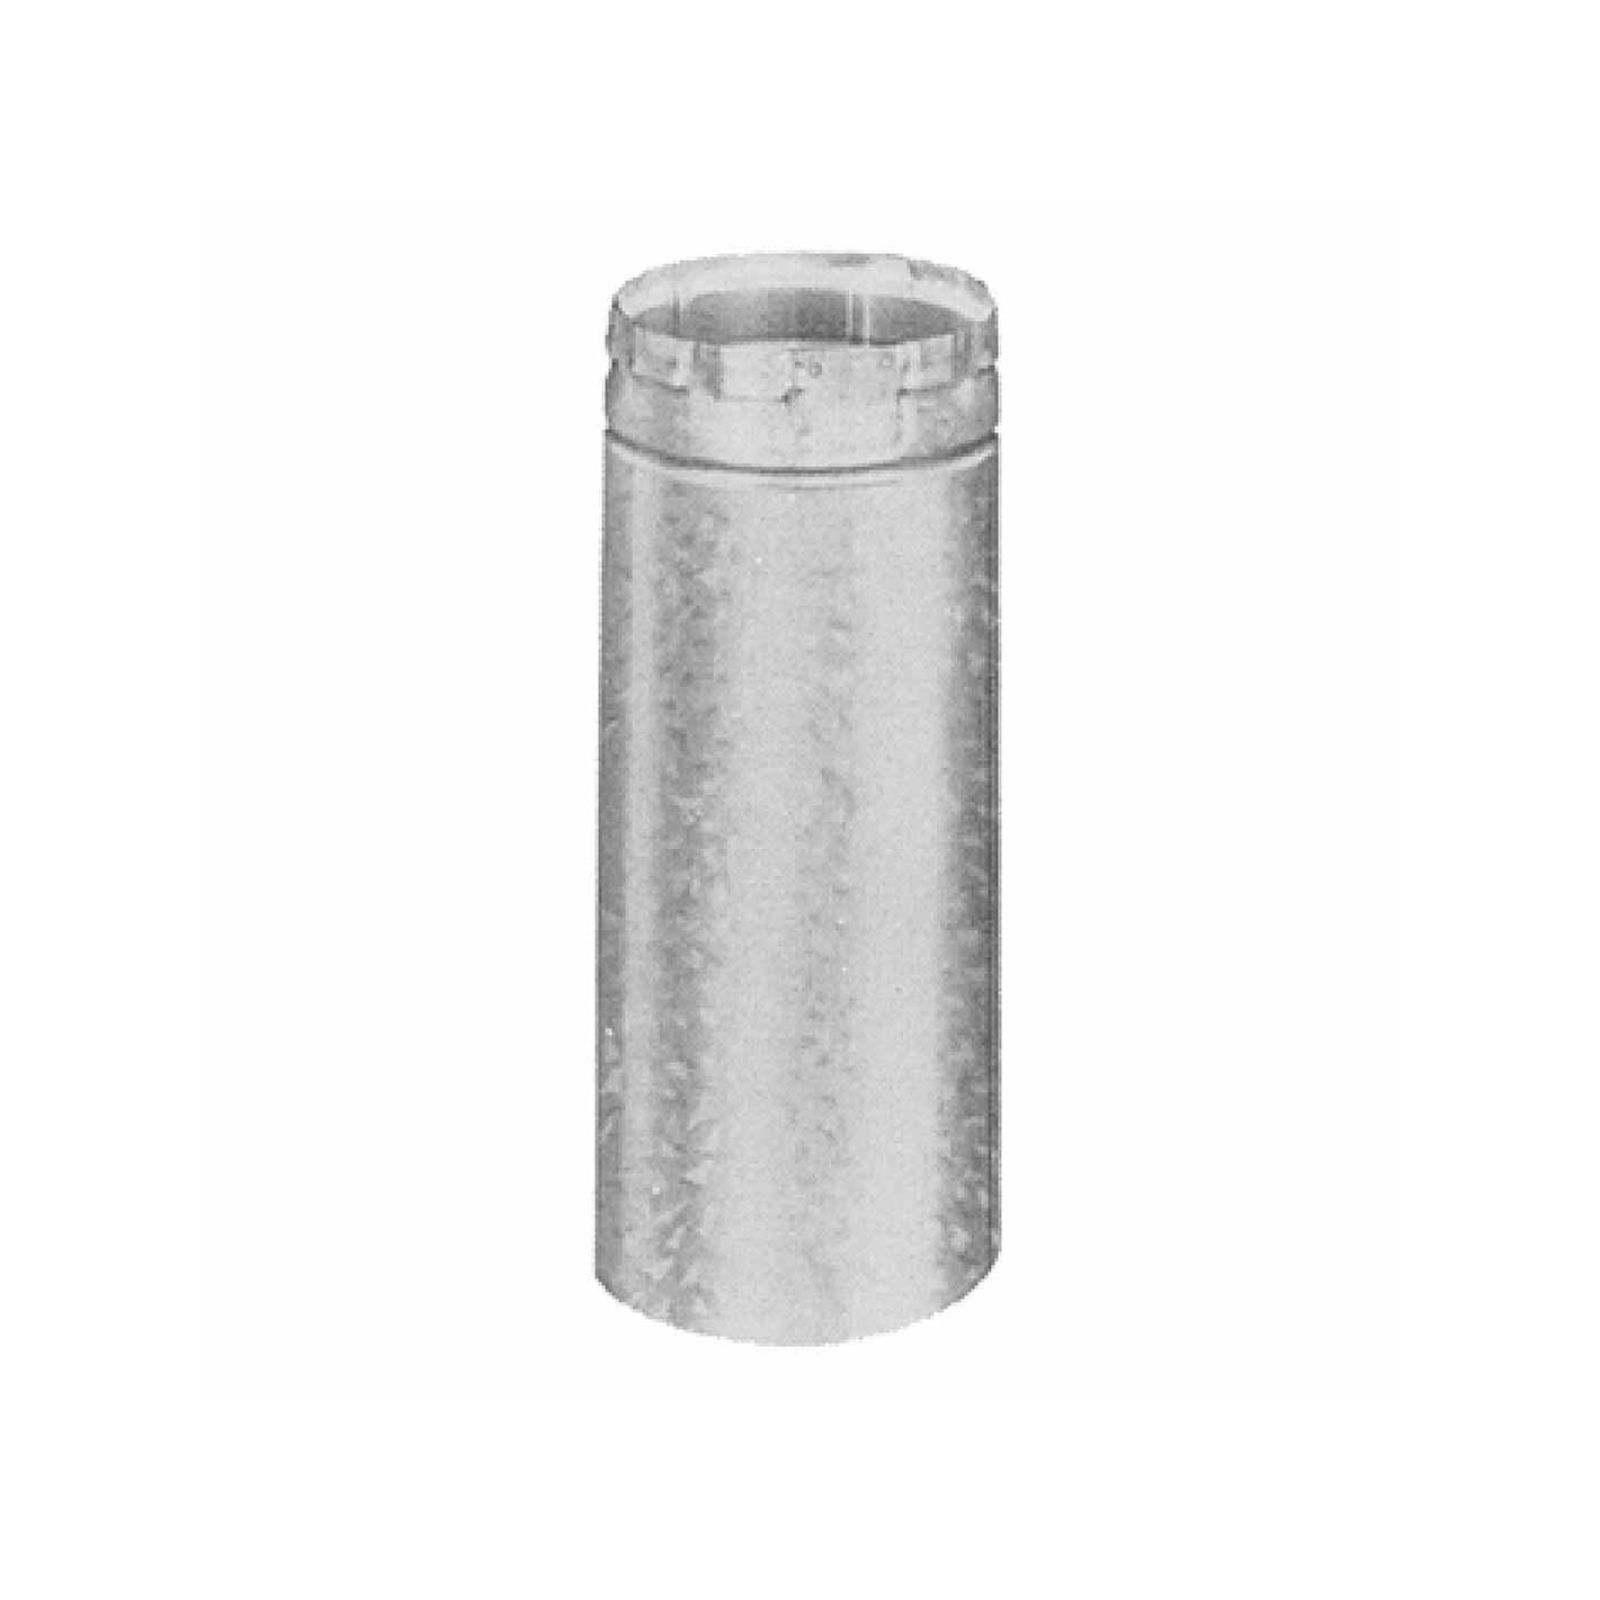 AmeriVent 4E12A - Adjustable Pipe Section Type B Gas Vent, 4" Round X 12" Length